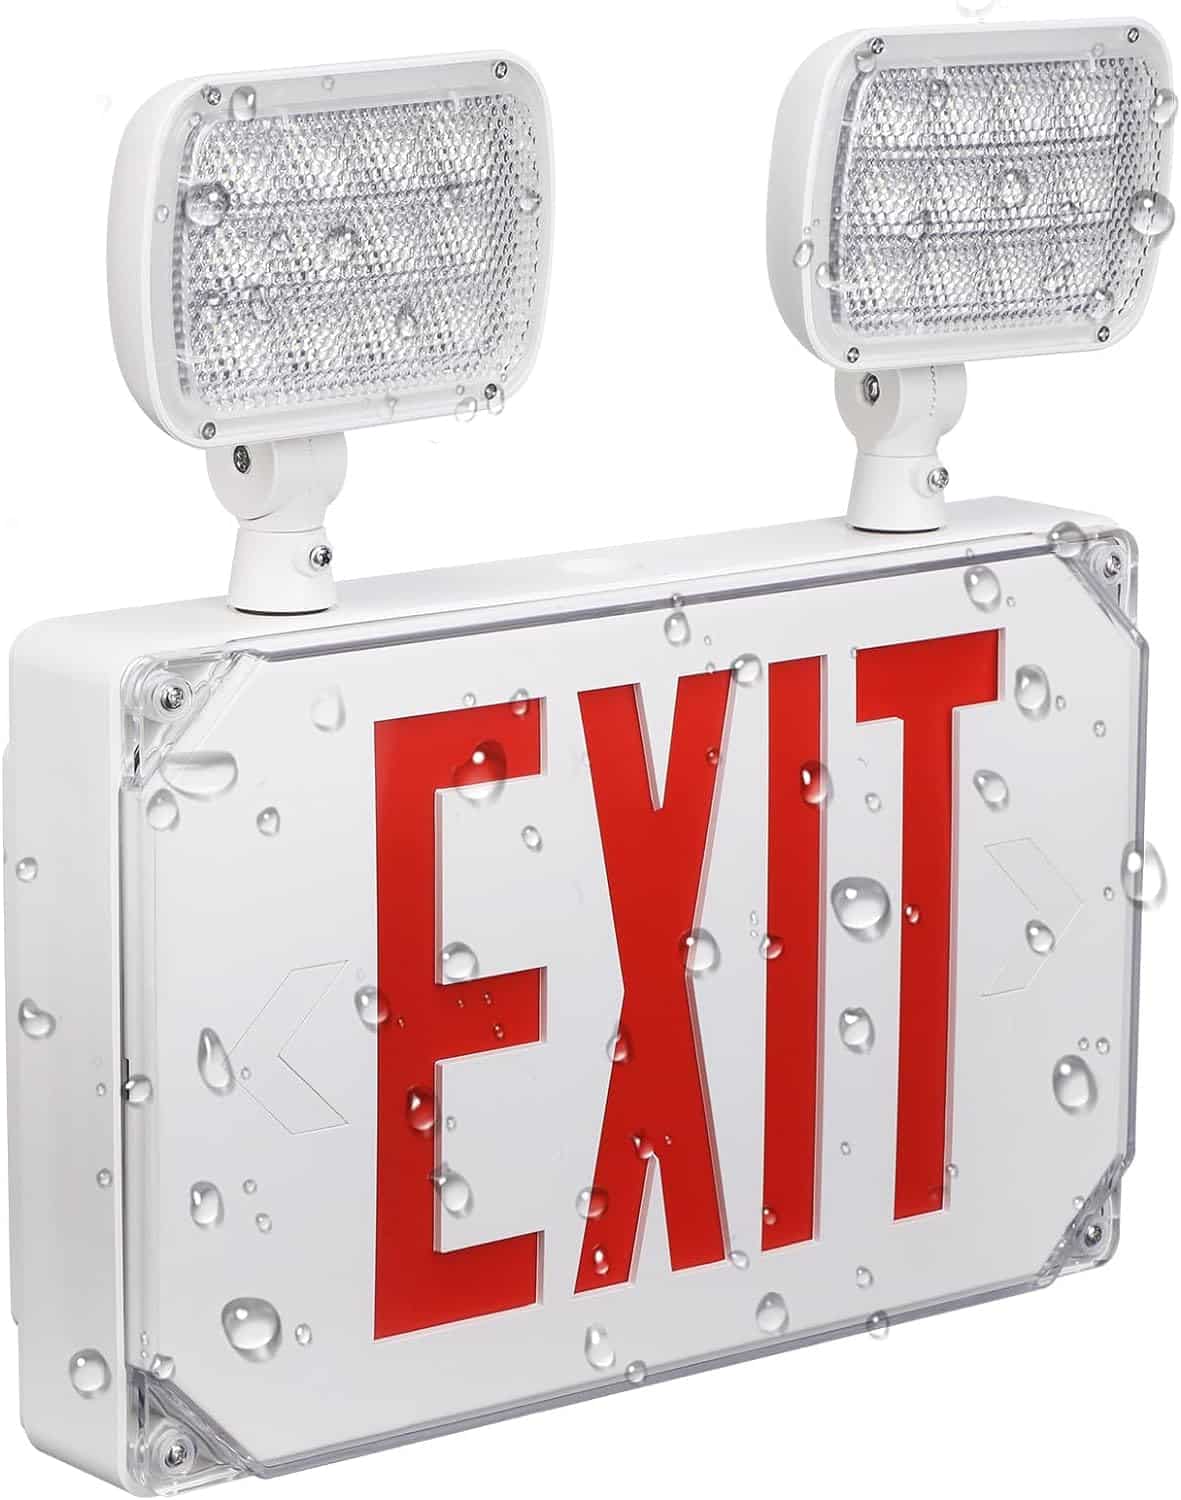 LEONLITE LED Exit Light, Wet Location Exit Sign with Emergency Lights, UL Listed, Combo Emergency Light with Battery Backup, Outdoor Hardwired Exit Light, 2 Dual Heads, Double Face, AC 120/277V, Red